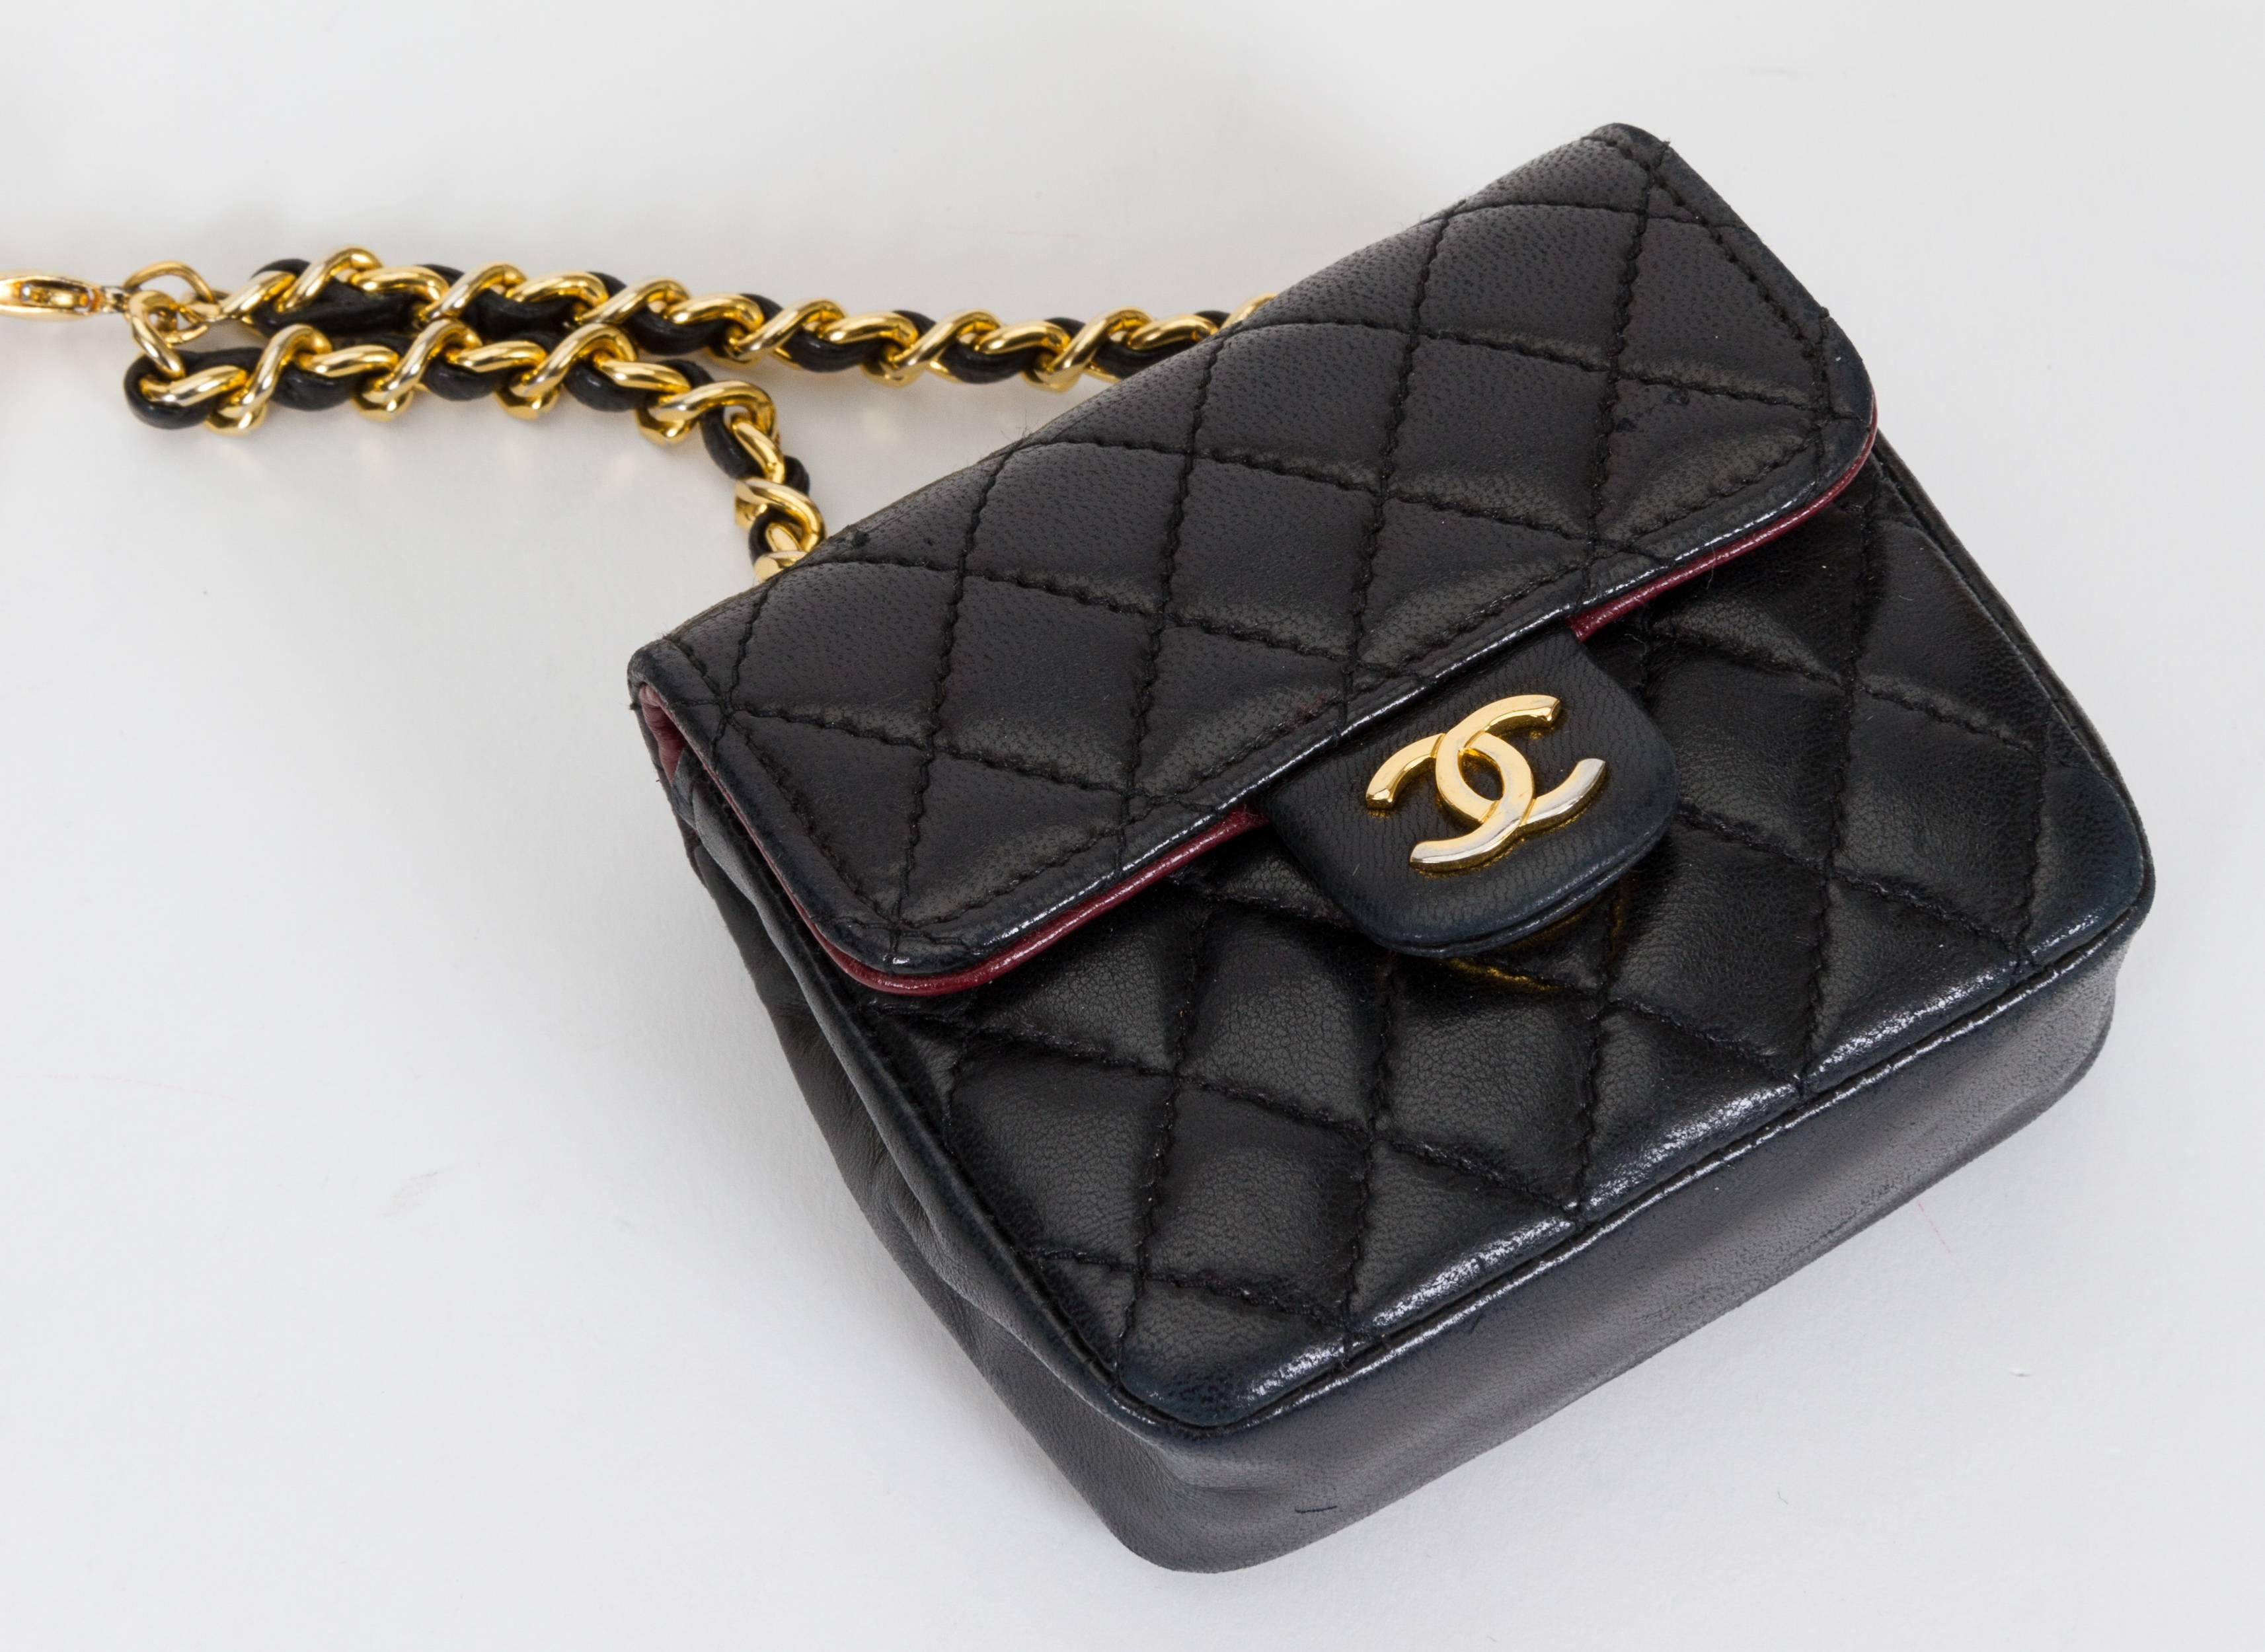 Chanel black leather quilted lambskin flap bag on gold plated chain belt, detachable bag. Very unique, hard to find and from the 1980's. Come with original box.